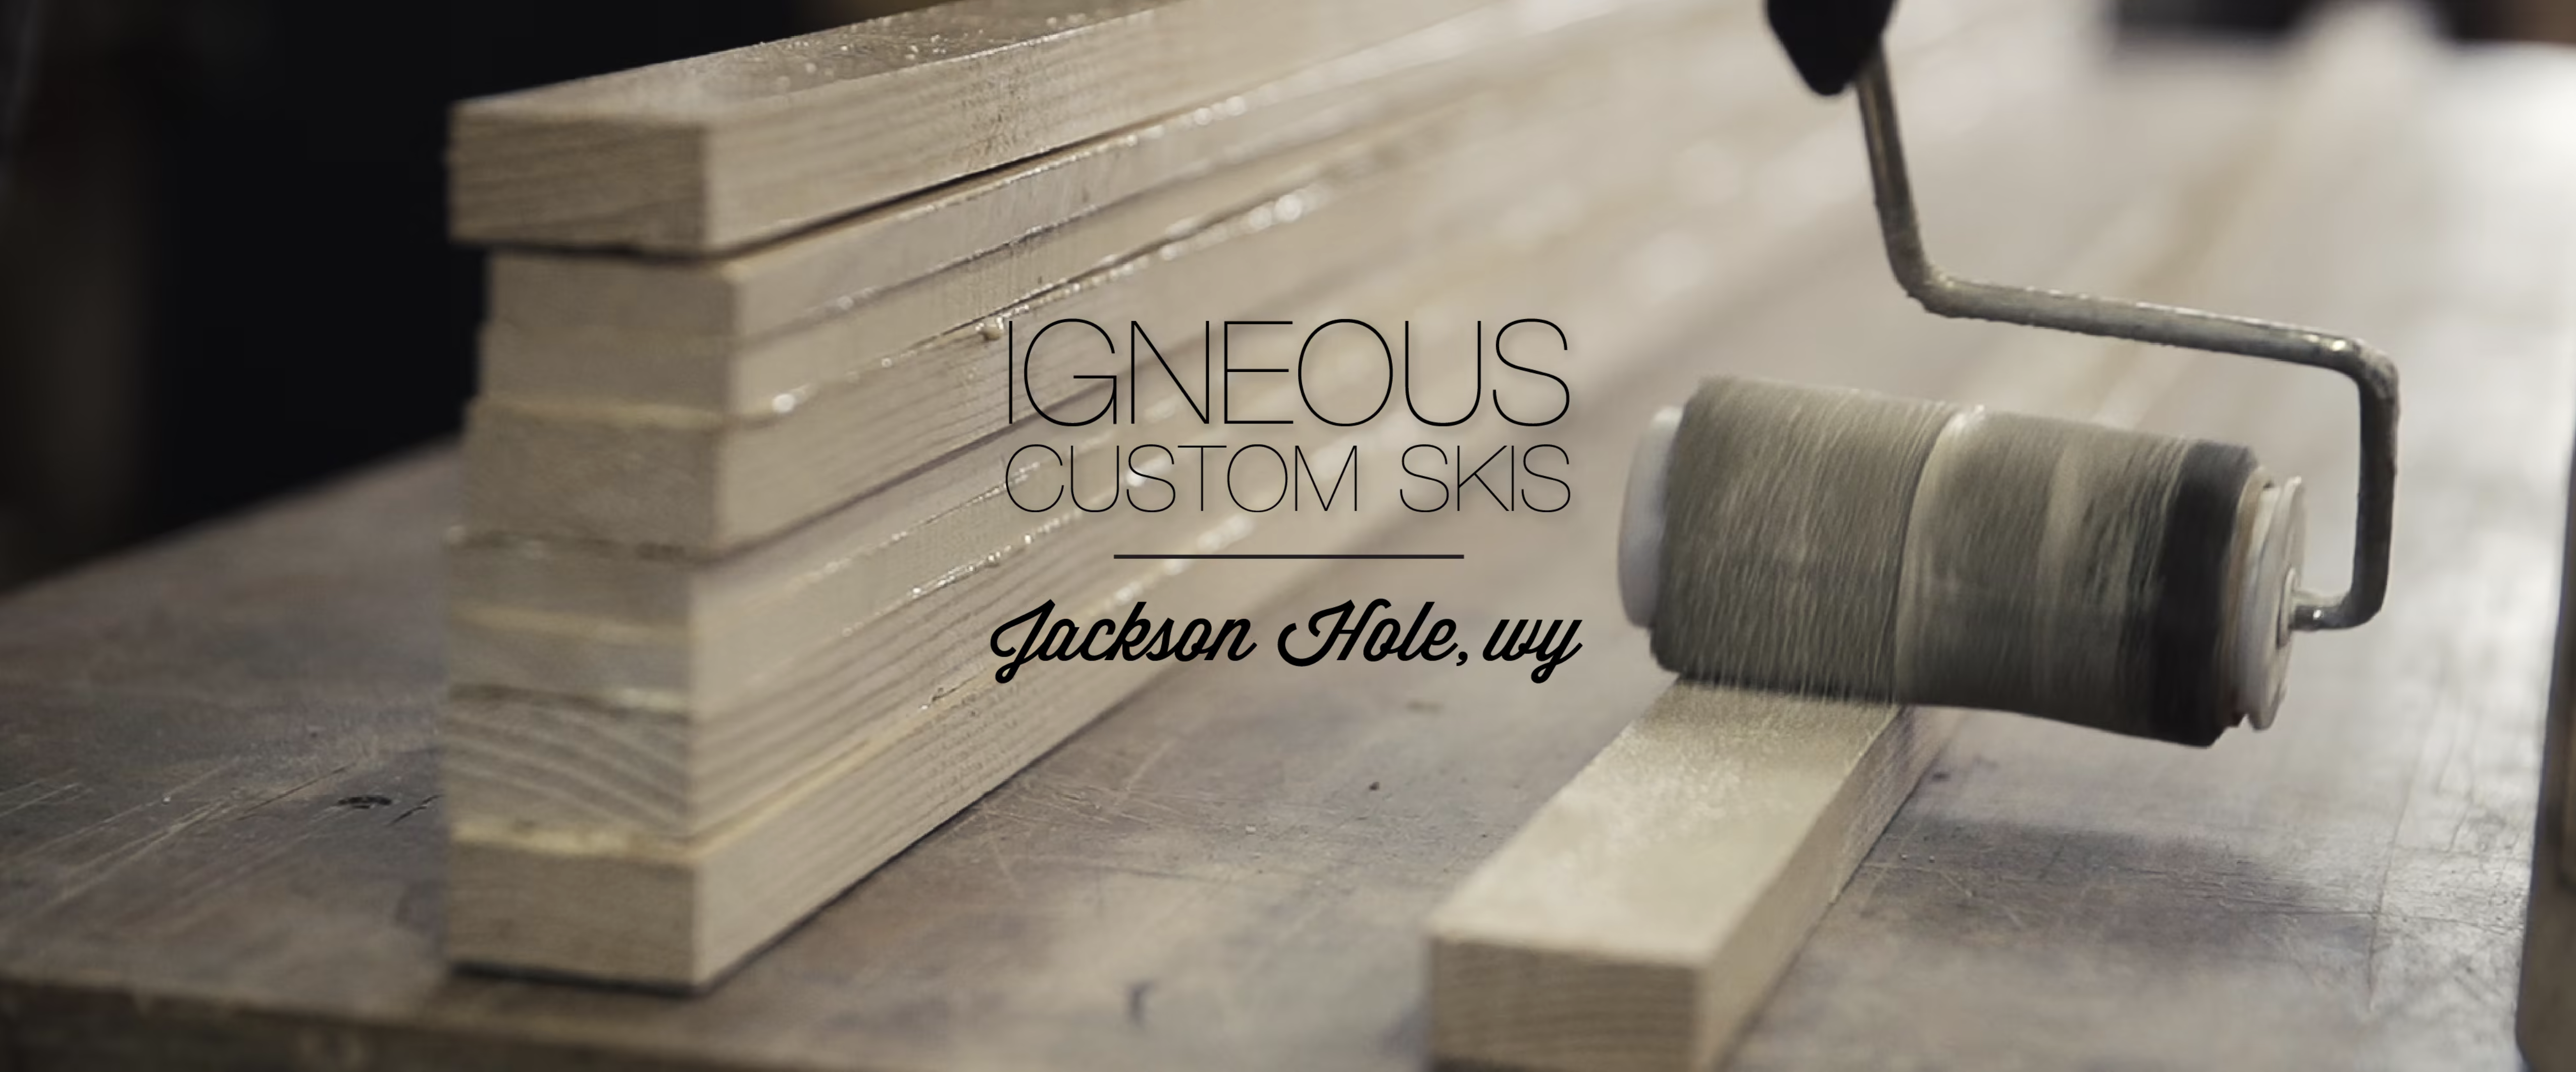 Reel image for Igneous Skis